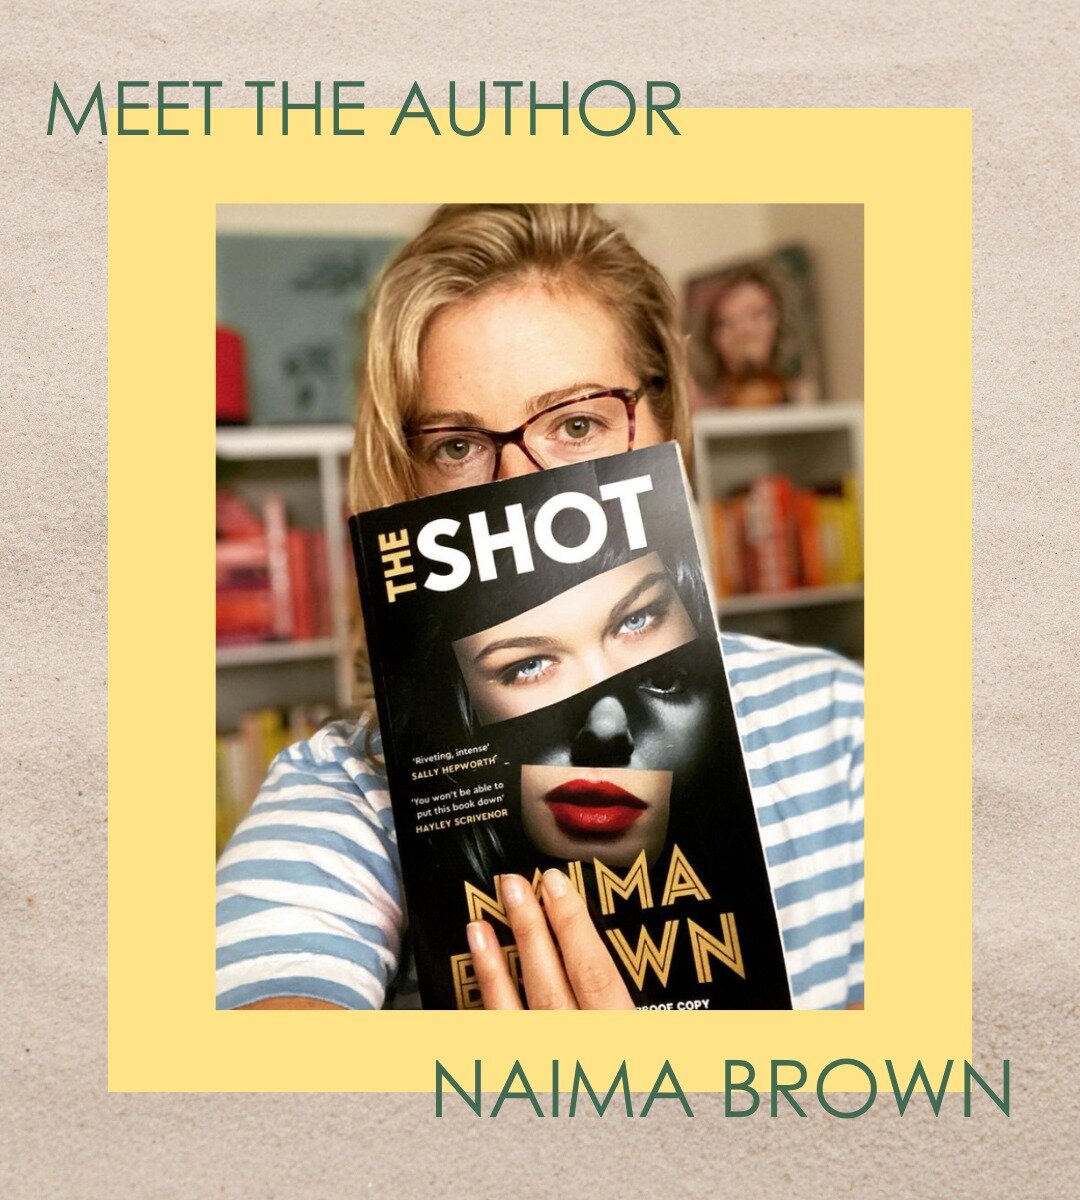 The next edition of New Voices Down Under will hit your inbox Sunday May 28. Have you subscribed yet? The link&rsquo;s in the bio!

This month in Meet the Author, we chat with Naima Brown about her upcoming release The Shot. There are reviews of some